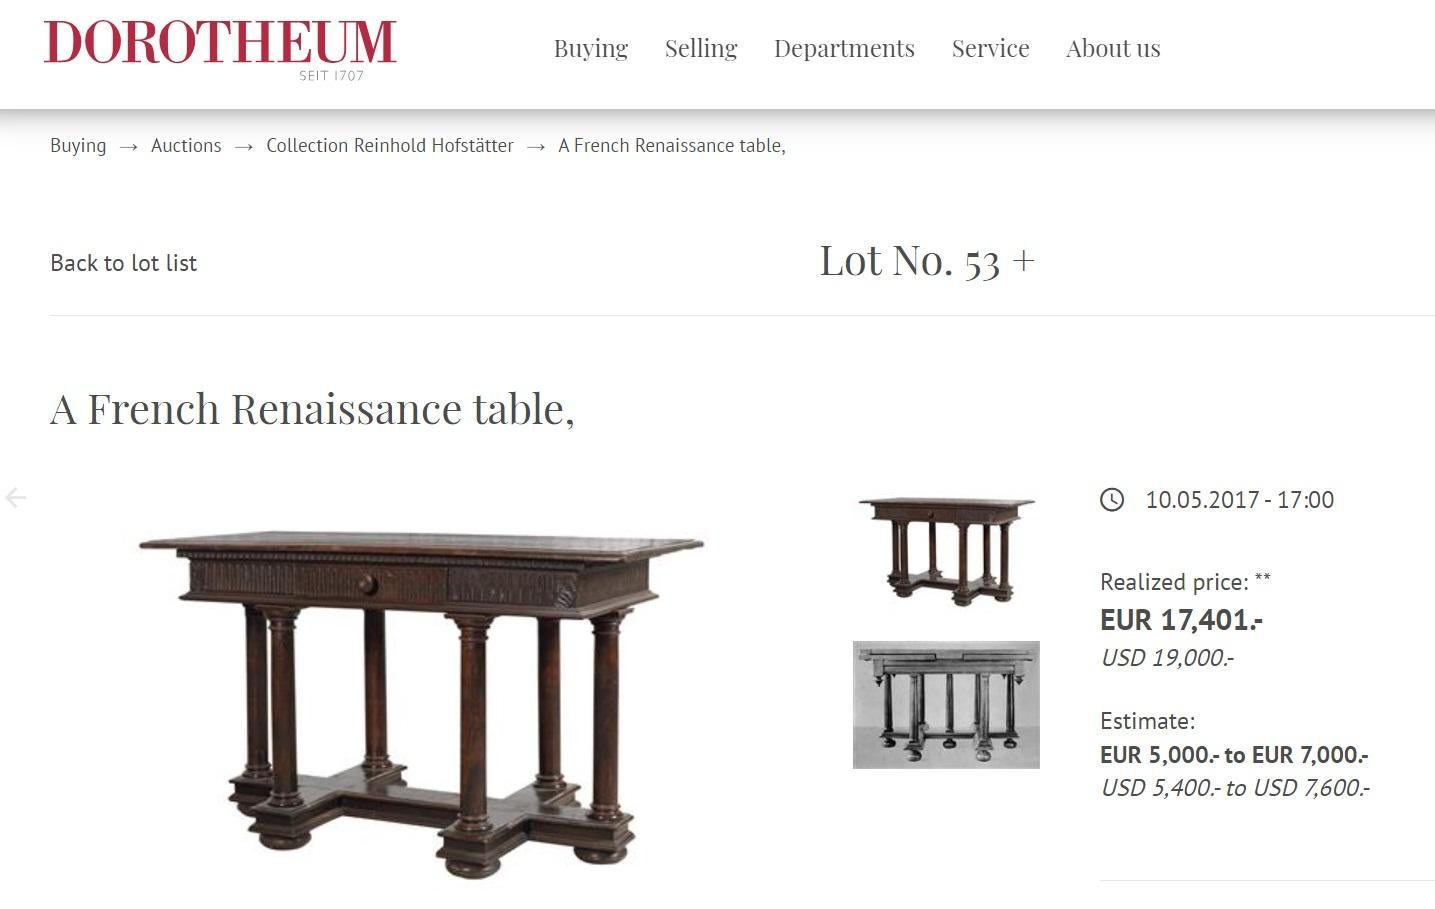 Royal House Antiques

Royal House Antiques is delighted to offer for sale this very rare and important pair of original French Renaissance period serving tables, they are 17th century examples with the original drawers

Please note the delivery fee